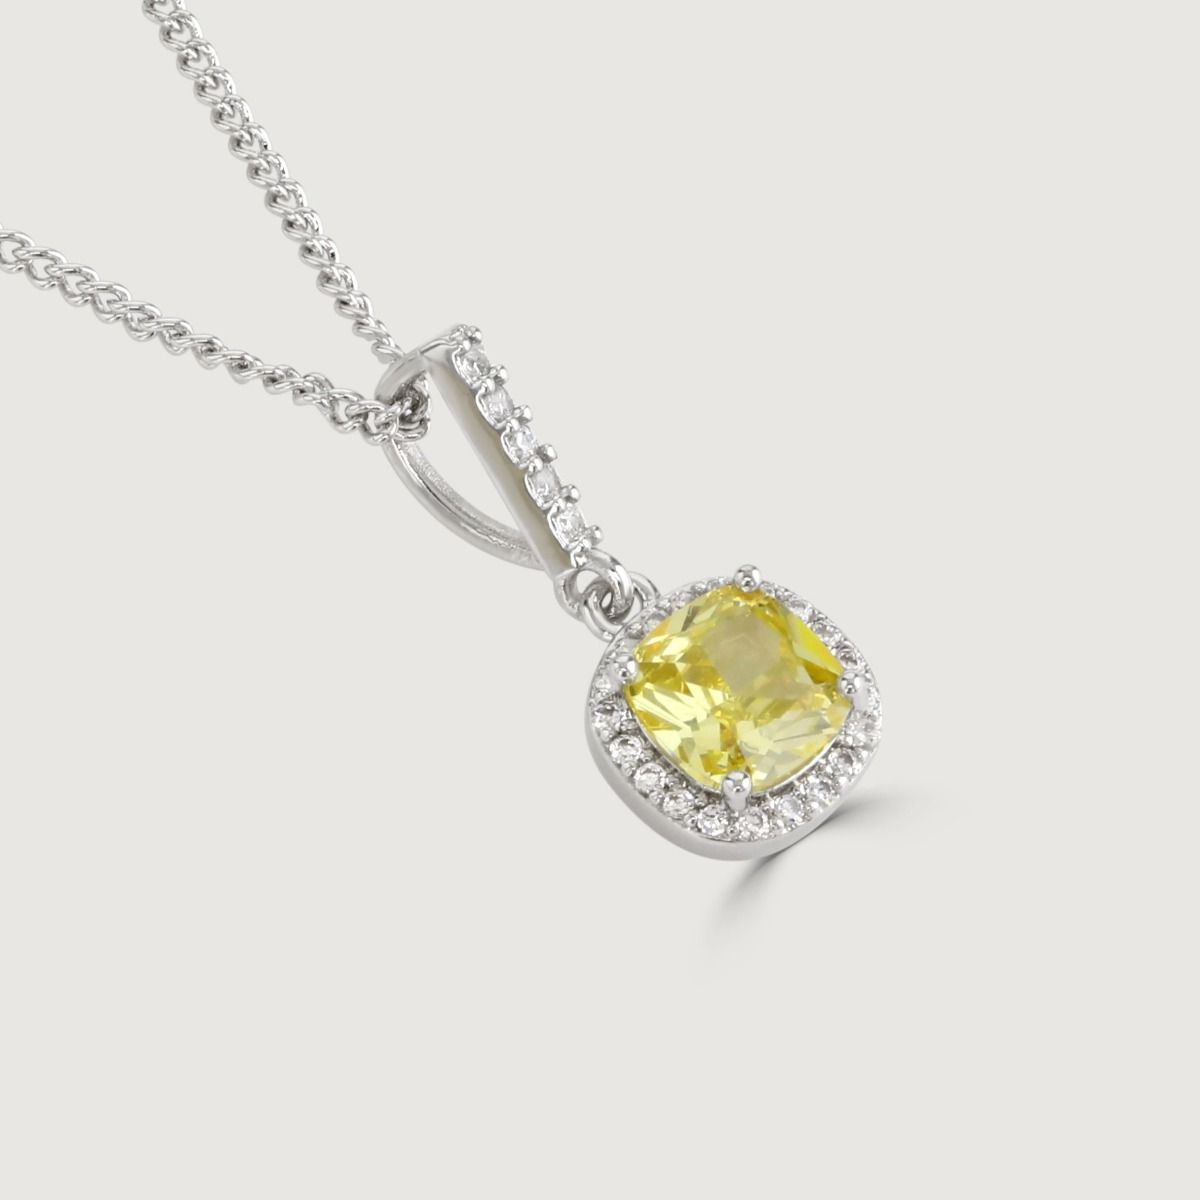 The Canary Cushion Drop Pendant is a enrapturing piece. Impeccably shaped cubic zirconia stones encircle a yellow diamond cushion cut centre, exuding a mesmerising allure.